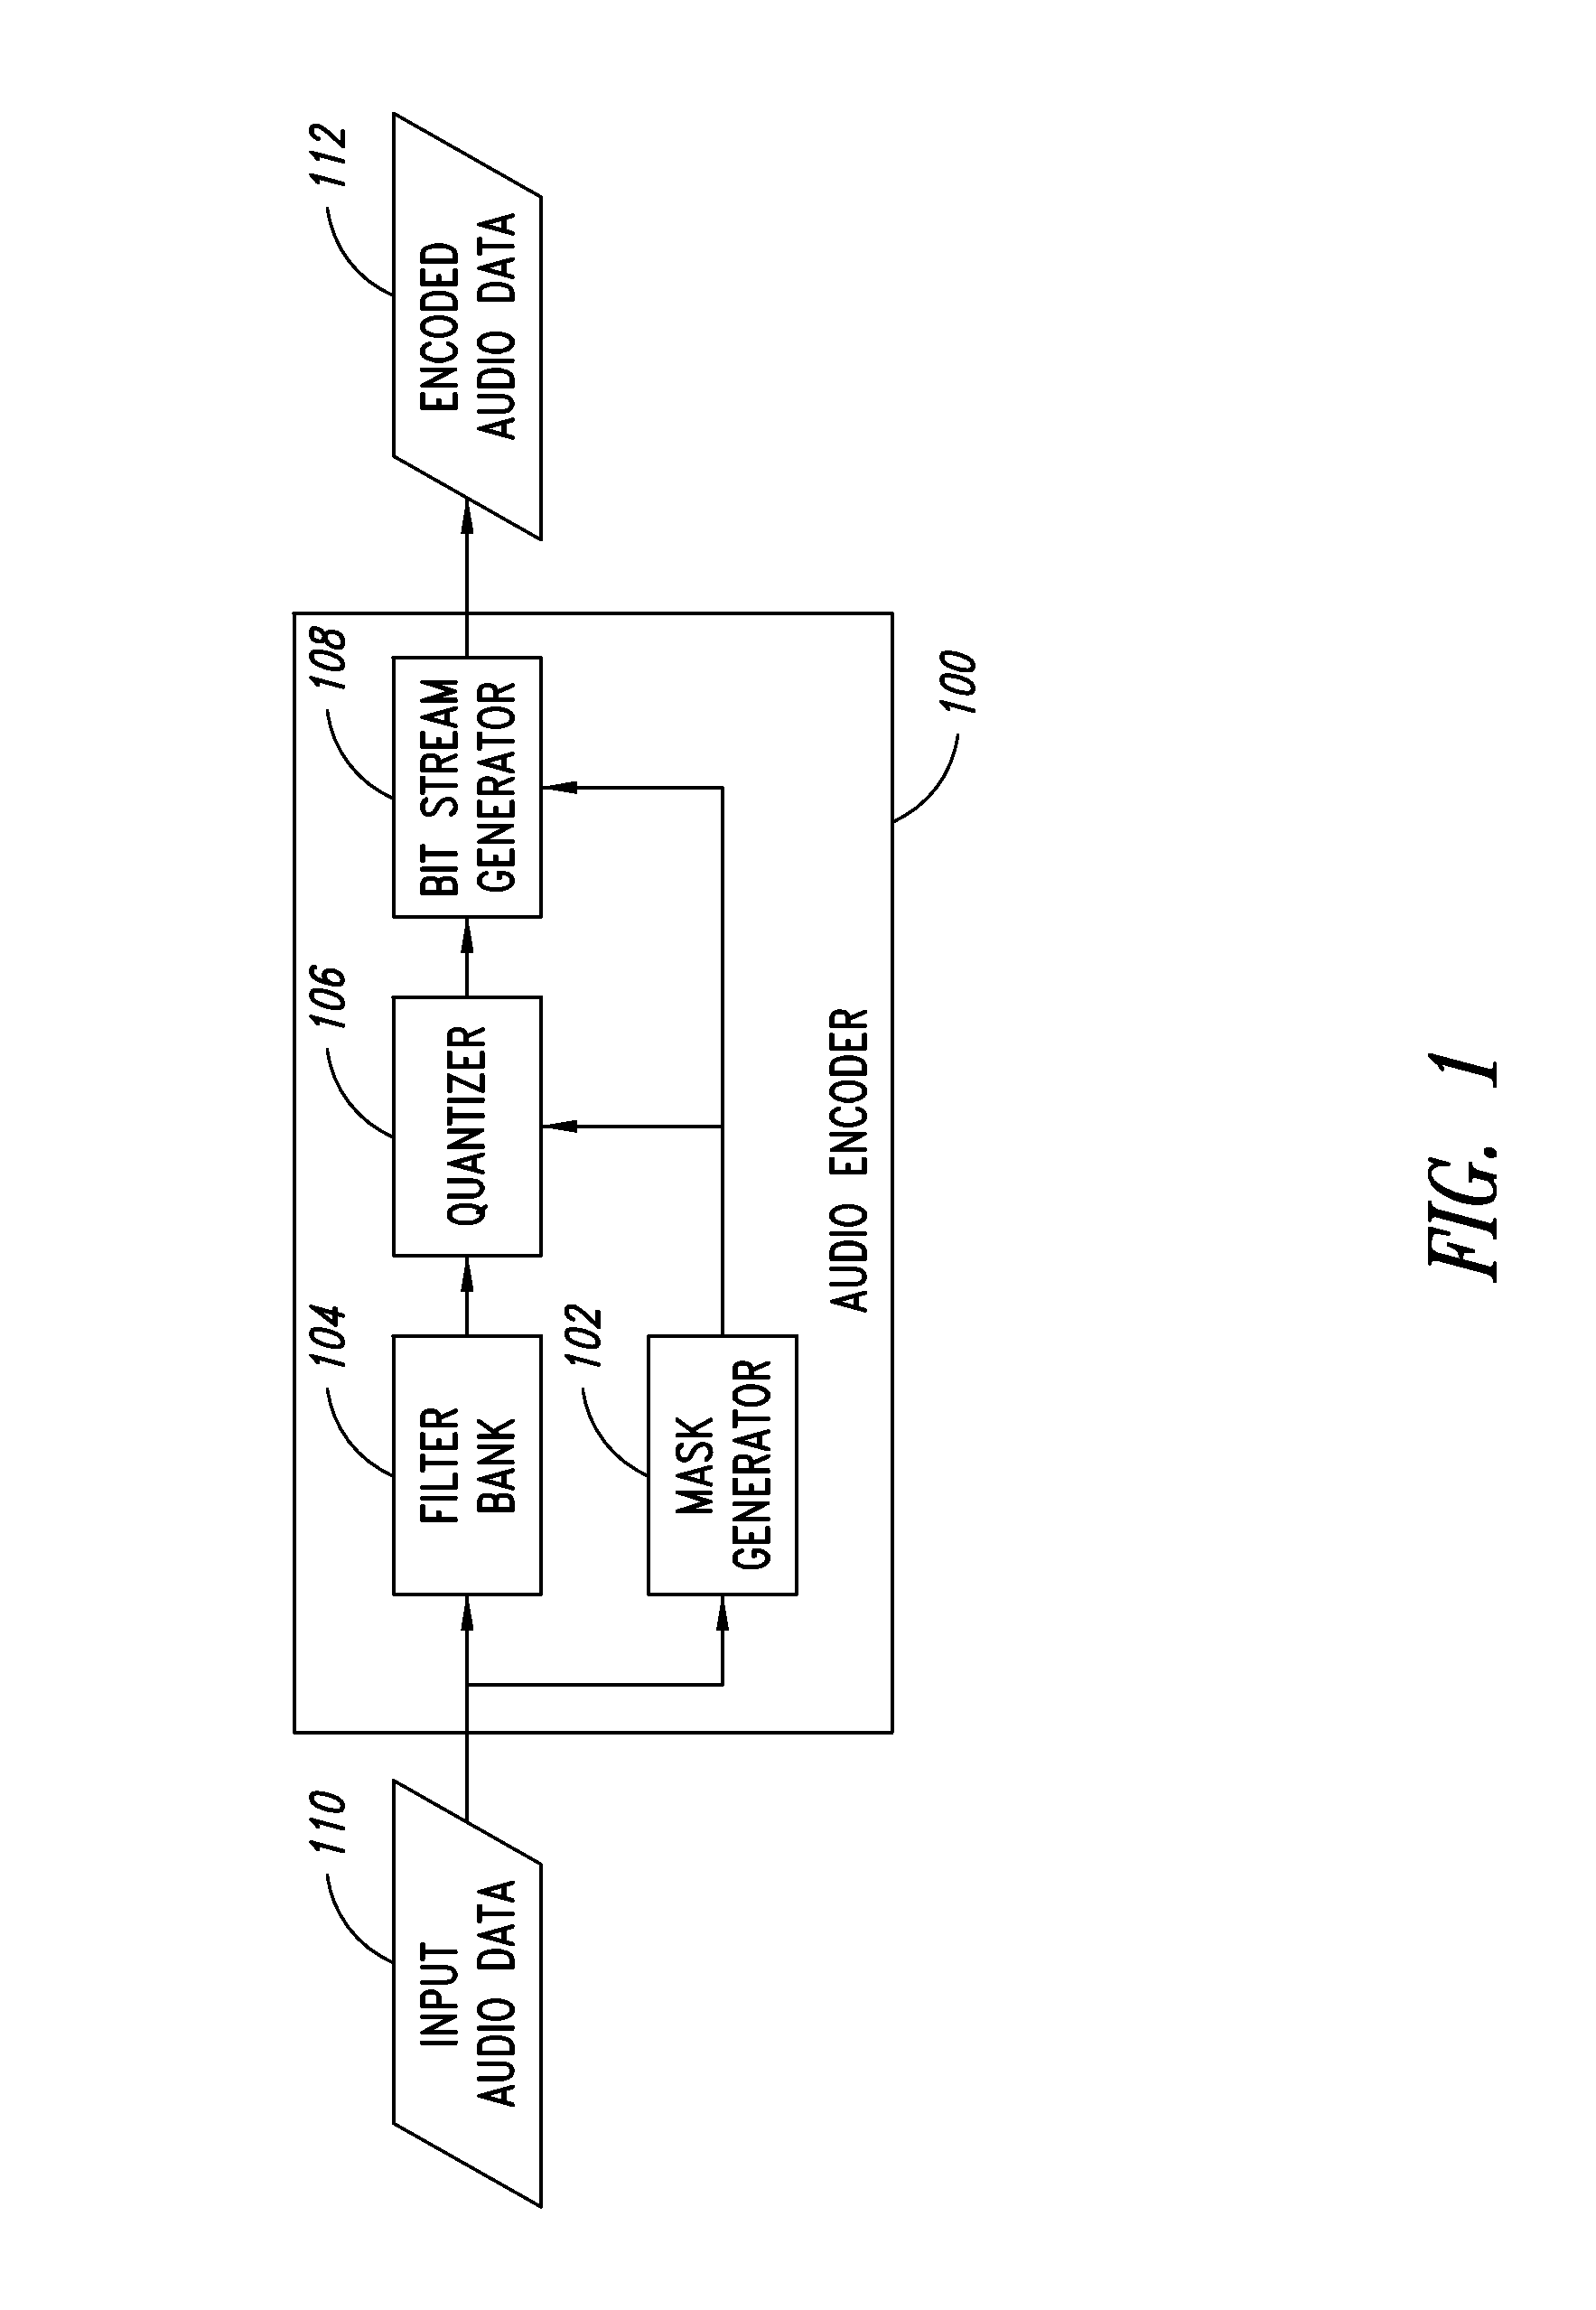 Device and process for use in encoding audio data